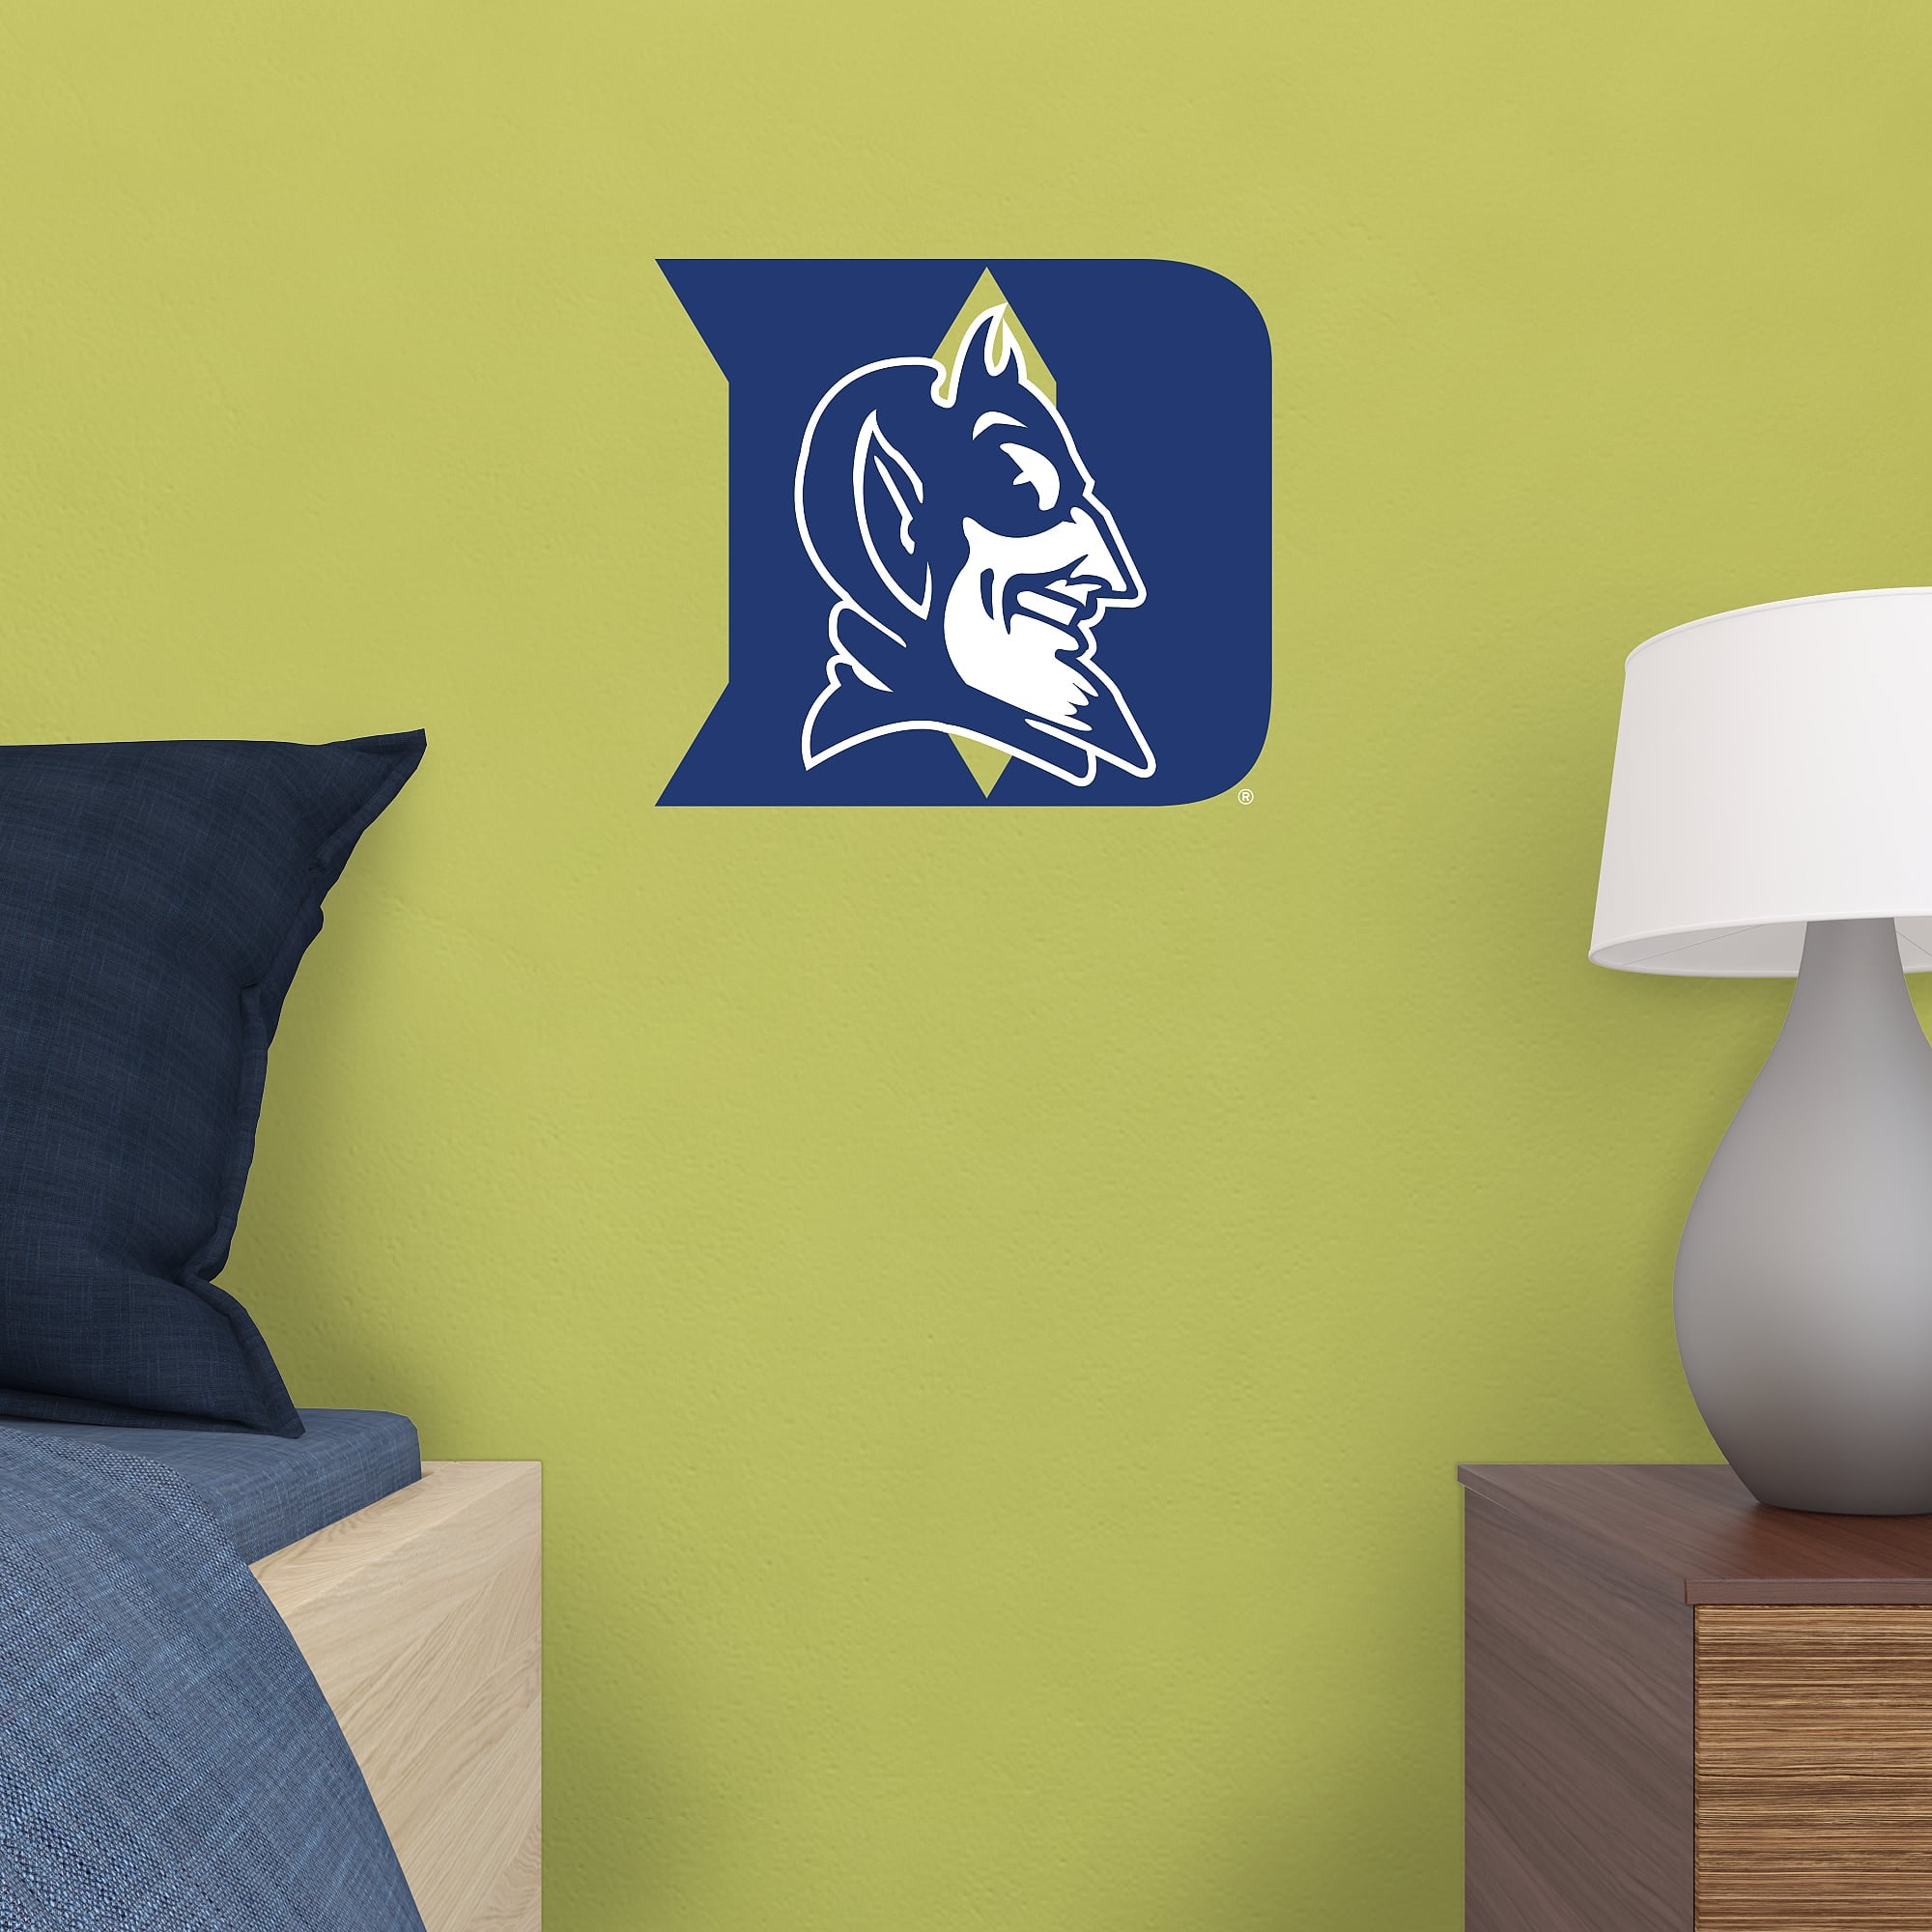 Duke Blue Devils: Logo - Officially Licensed Removable Wall Decal 12.0"W x 12.0"H by Fathead | Vinyl